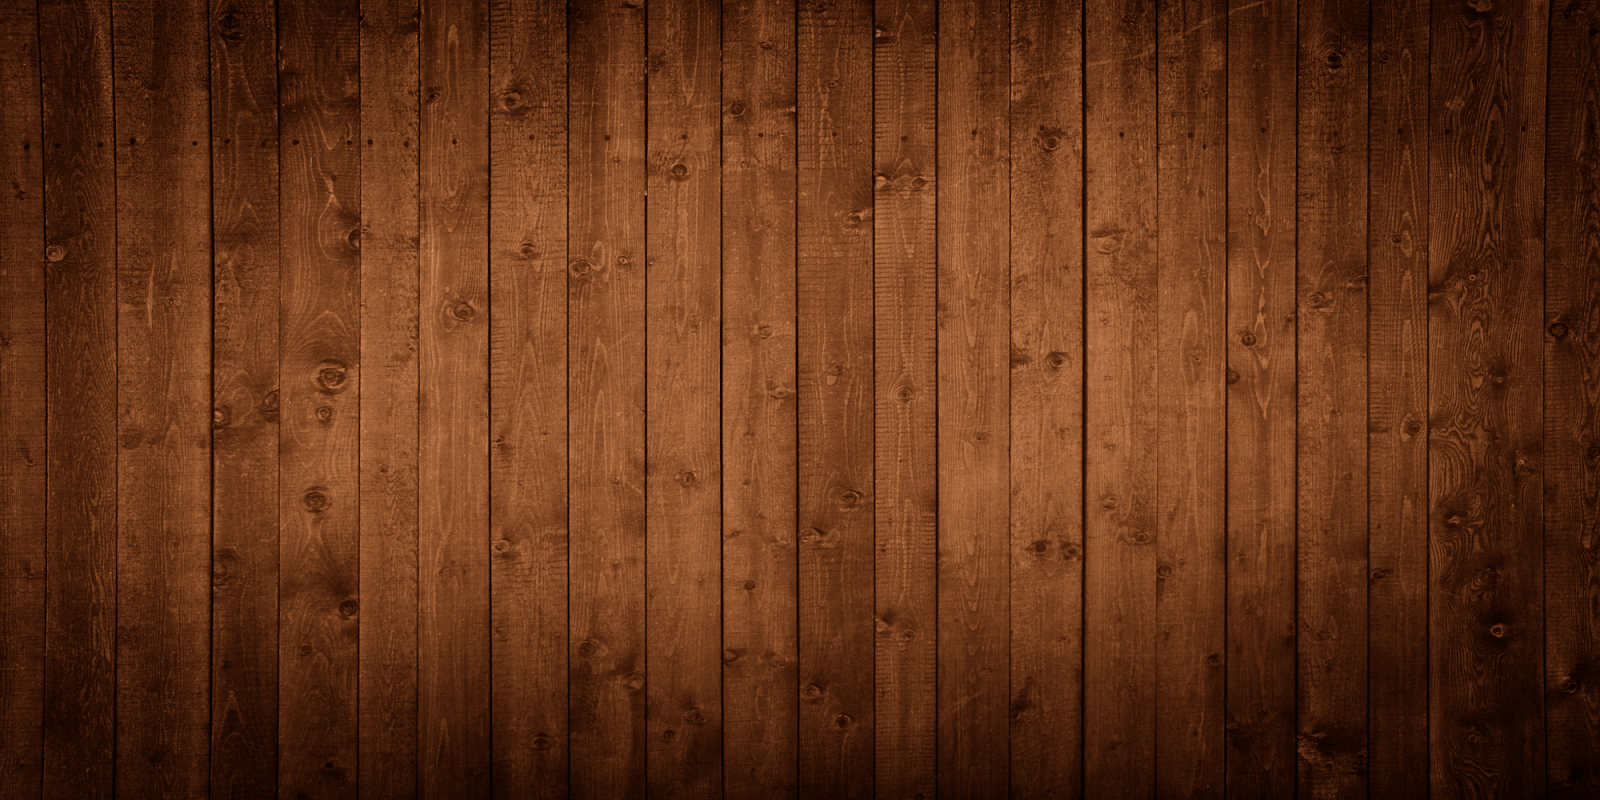 Private Area wood background  texture